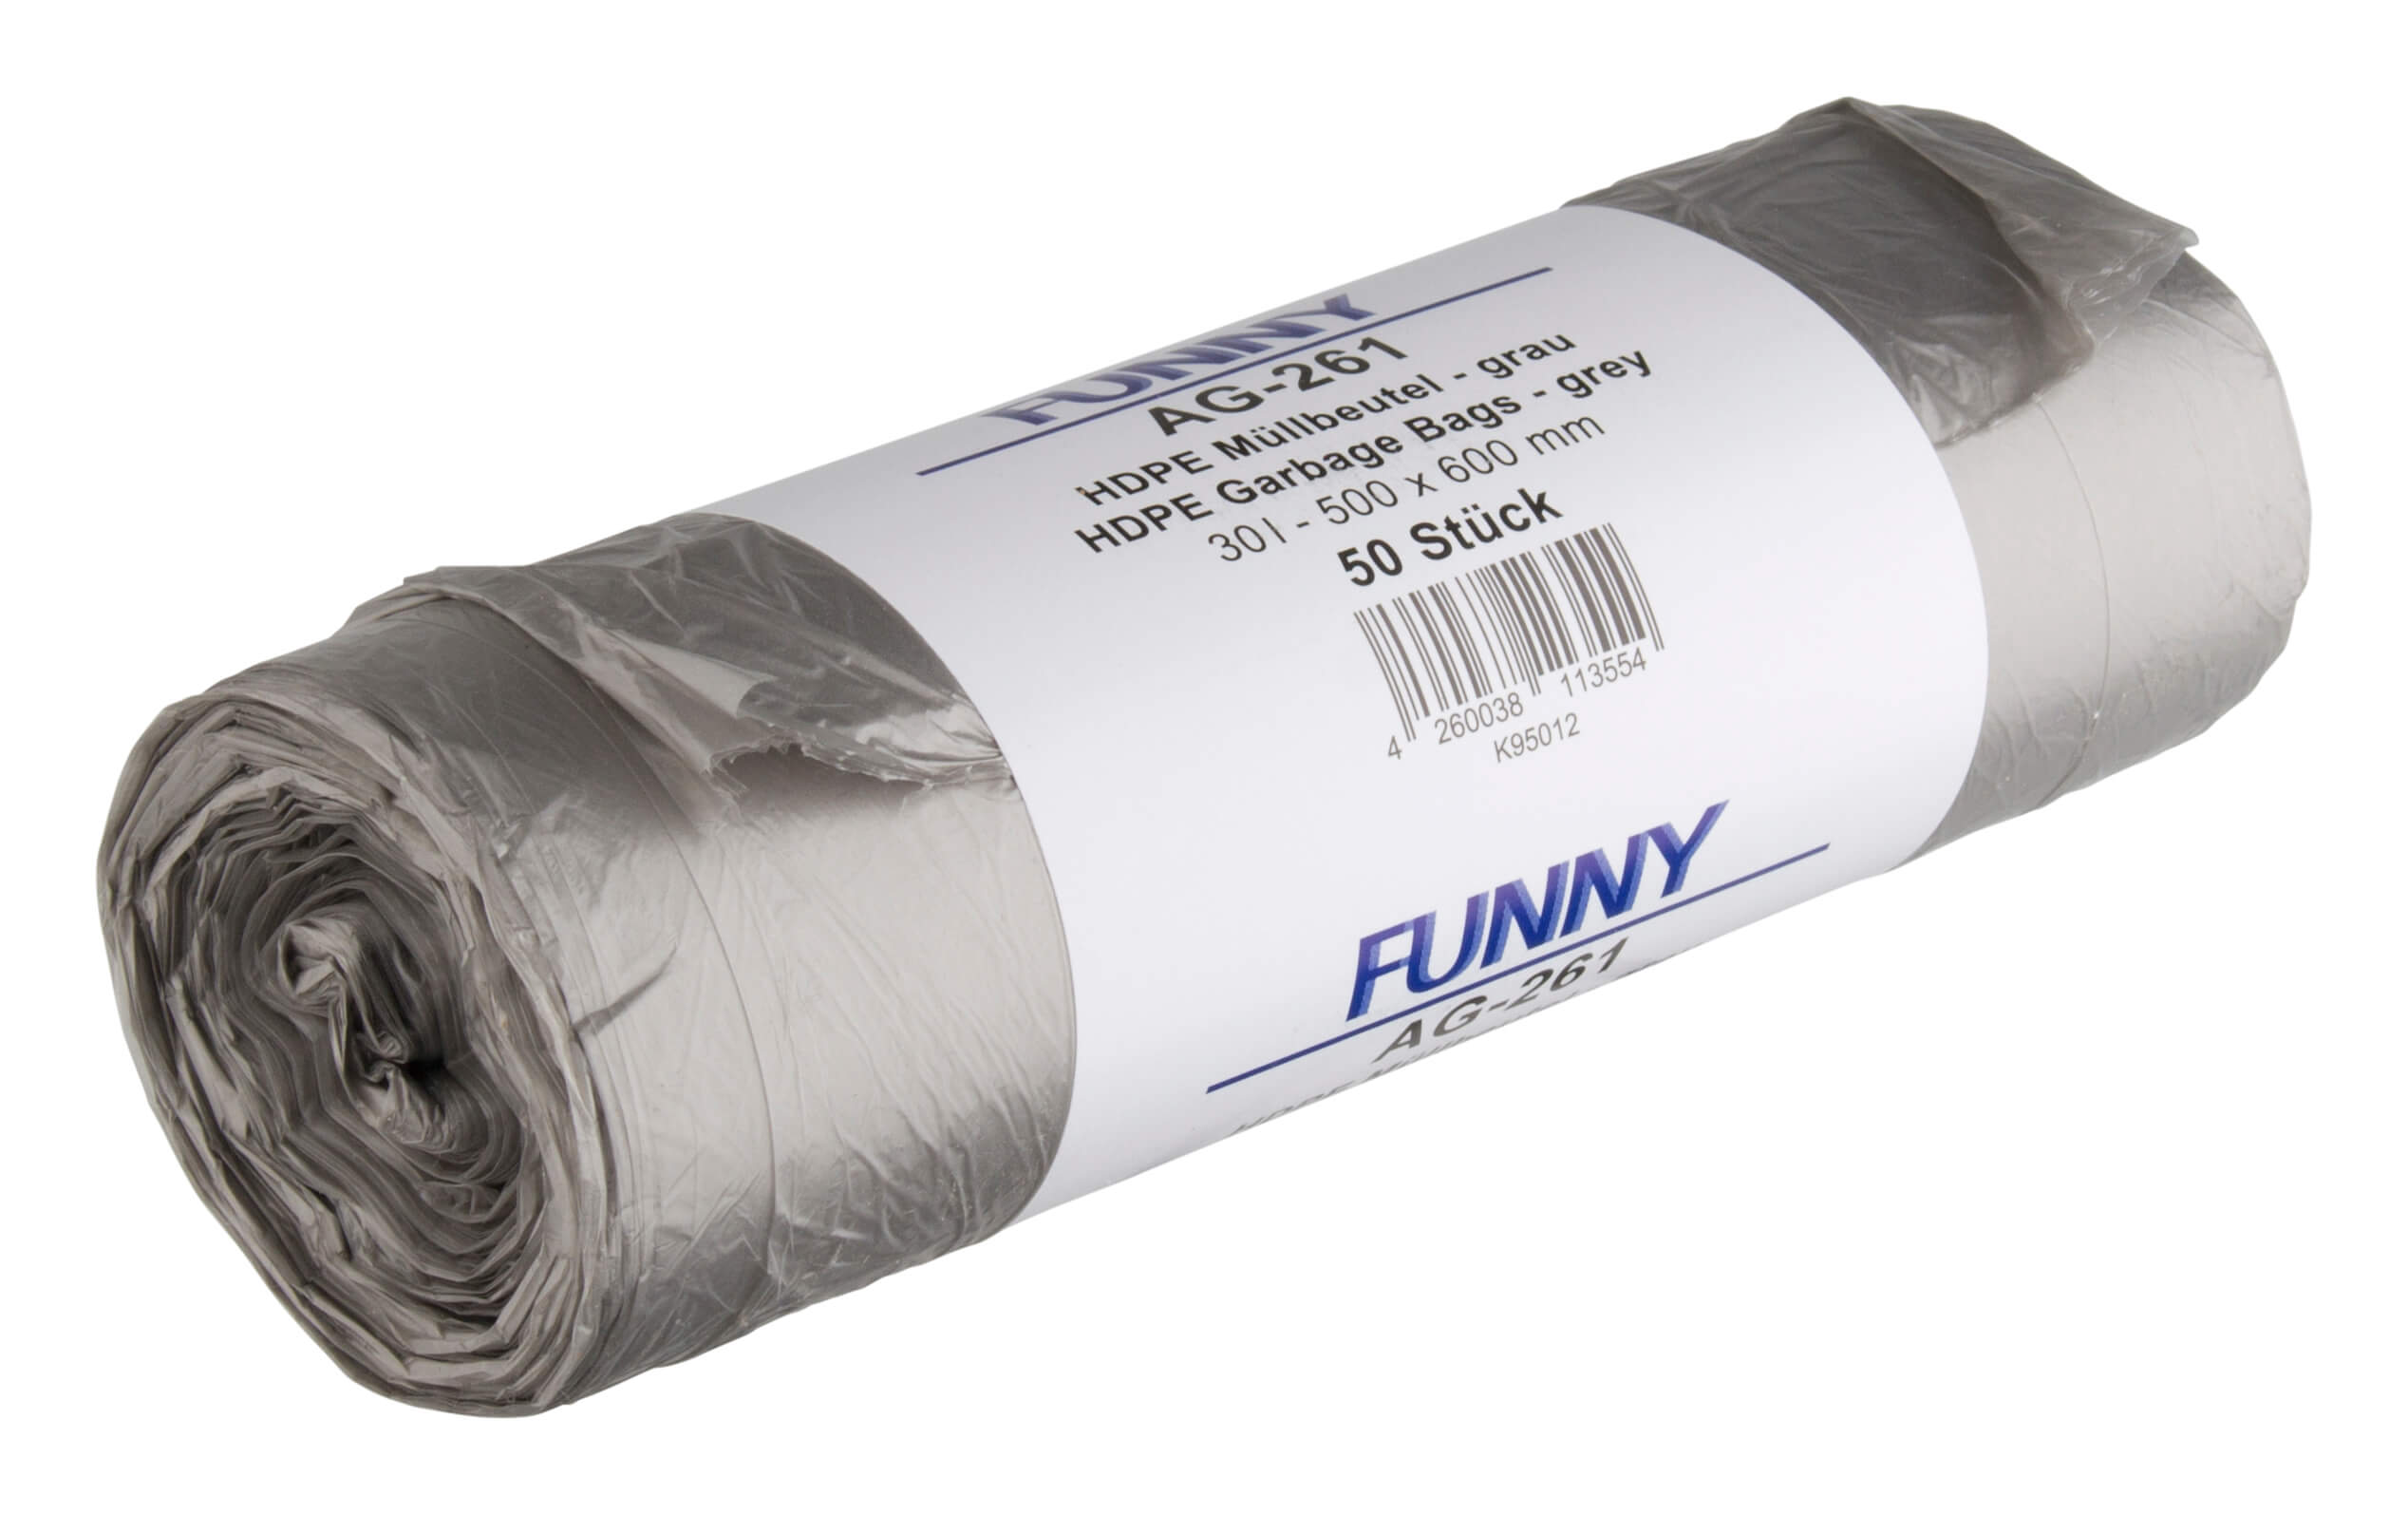 Waste bags, HDPE, grey - 30l (1 roll with 50 pcs.)